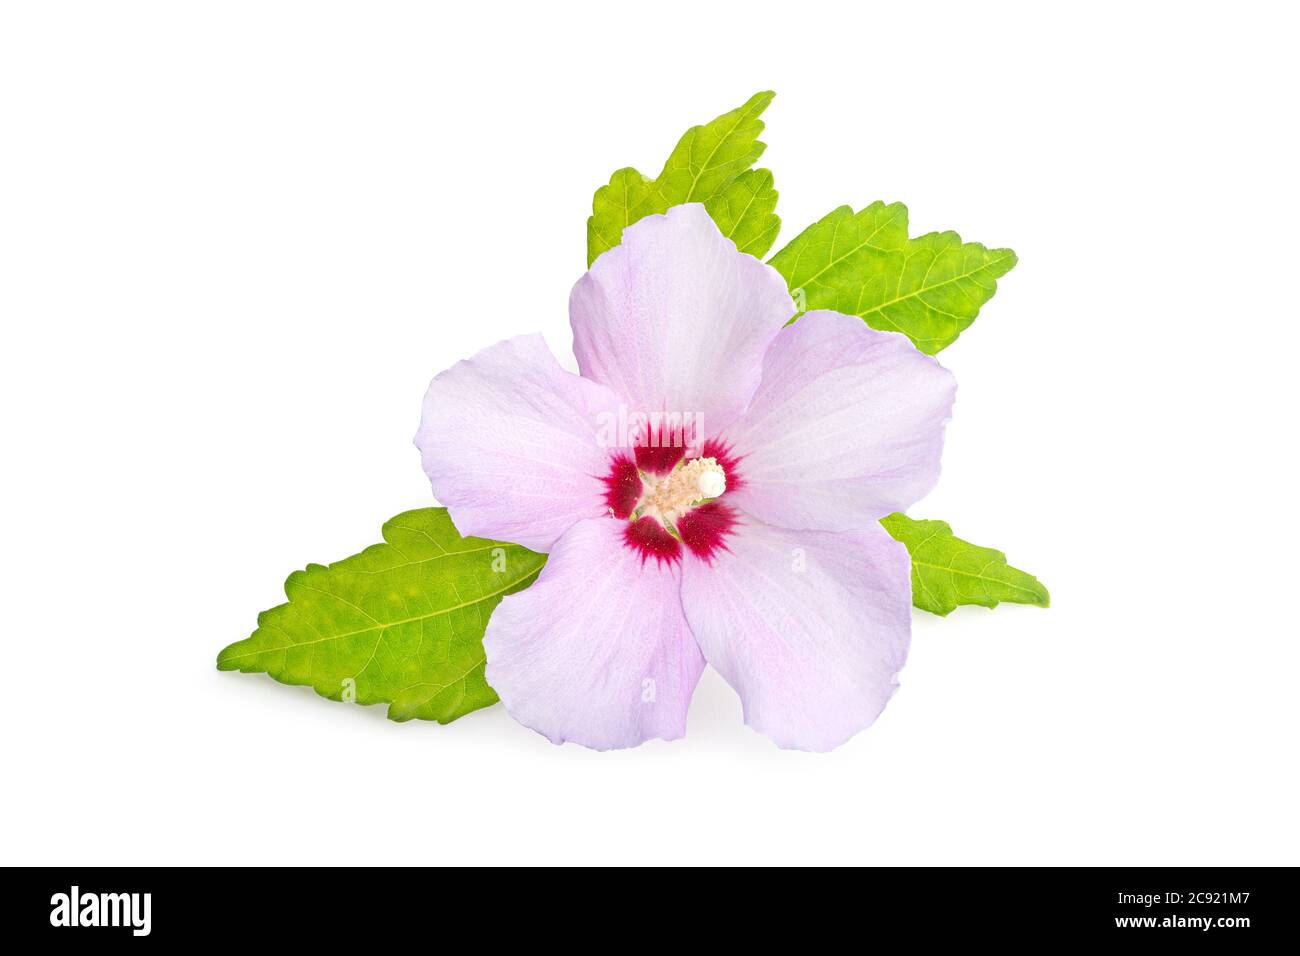 Pink or purple Rose Of Sharon flower isolated on white background. Hibiscus syriacus L. Stock Photo